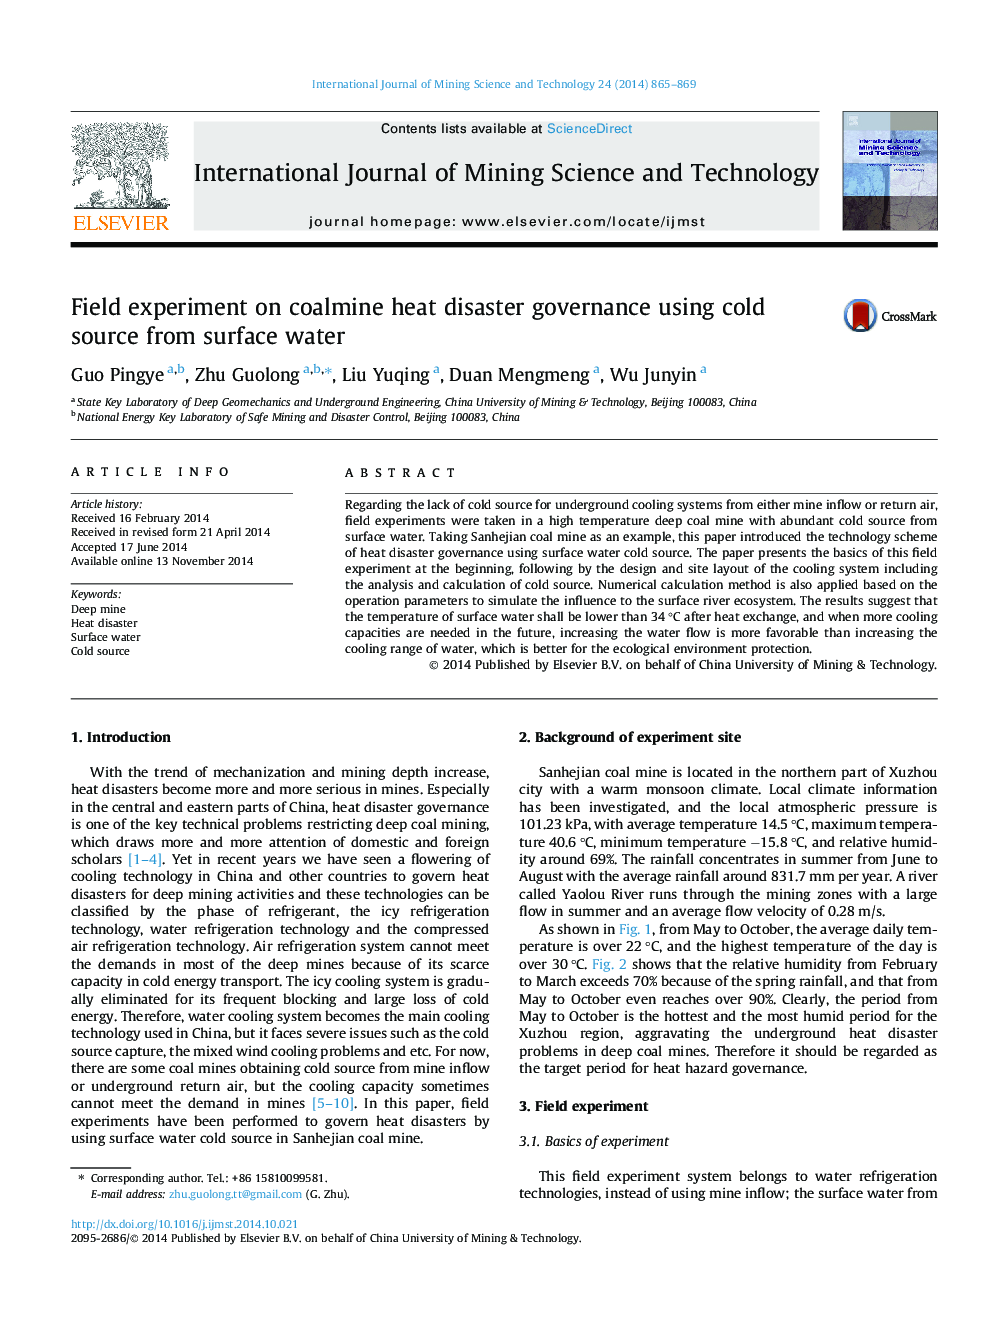 Field experiment on coalmine heat disaster governance using cold source from surface water